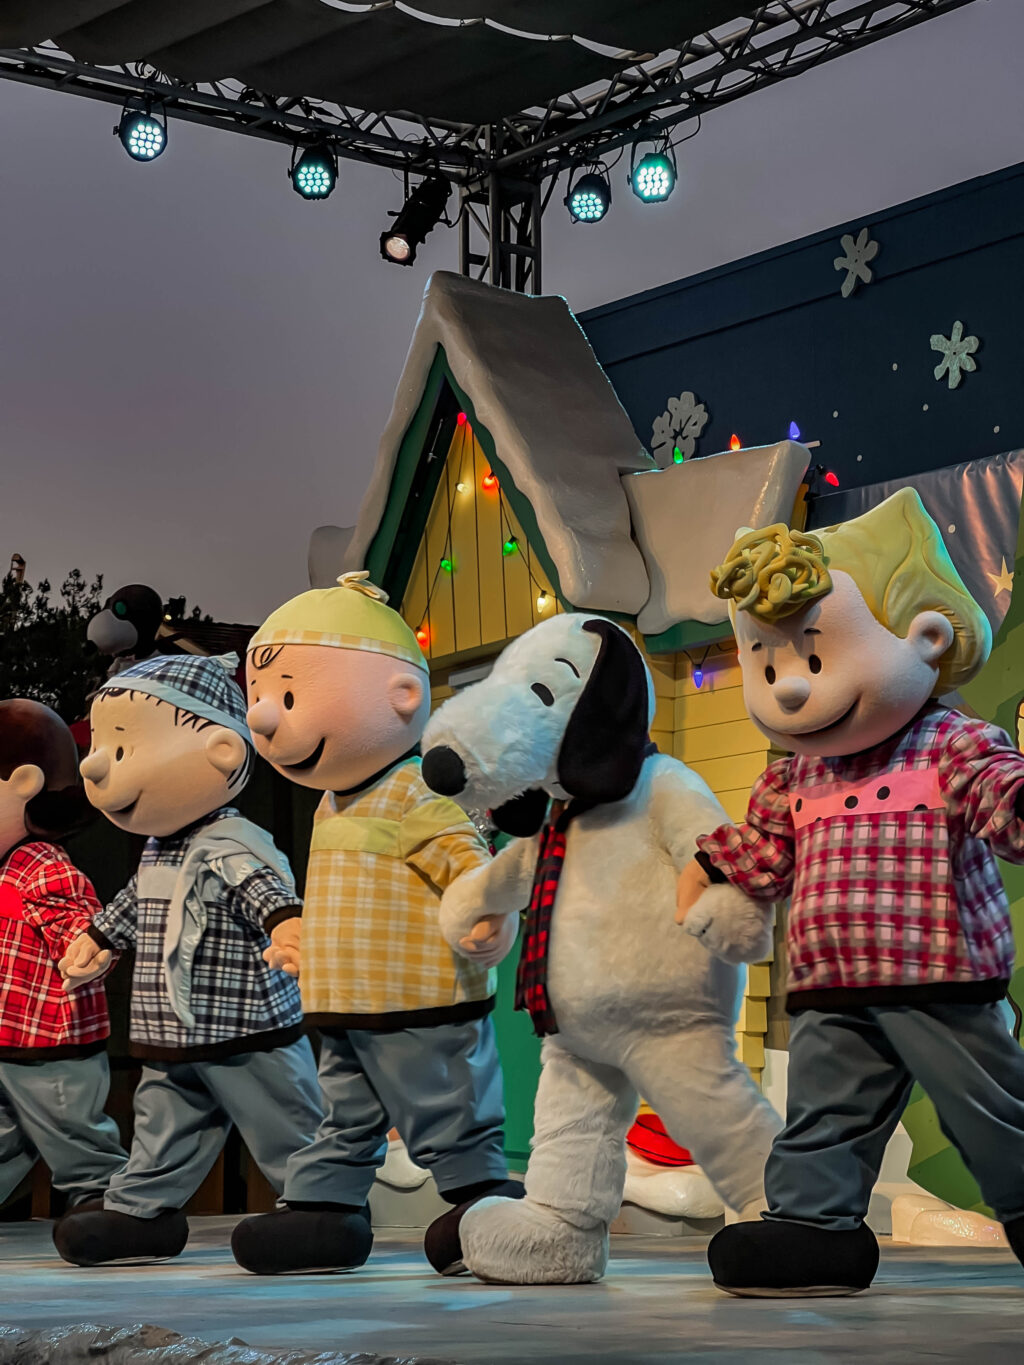 Best Wishes show at Knott's Merry Farm